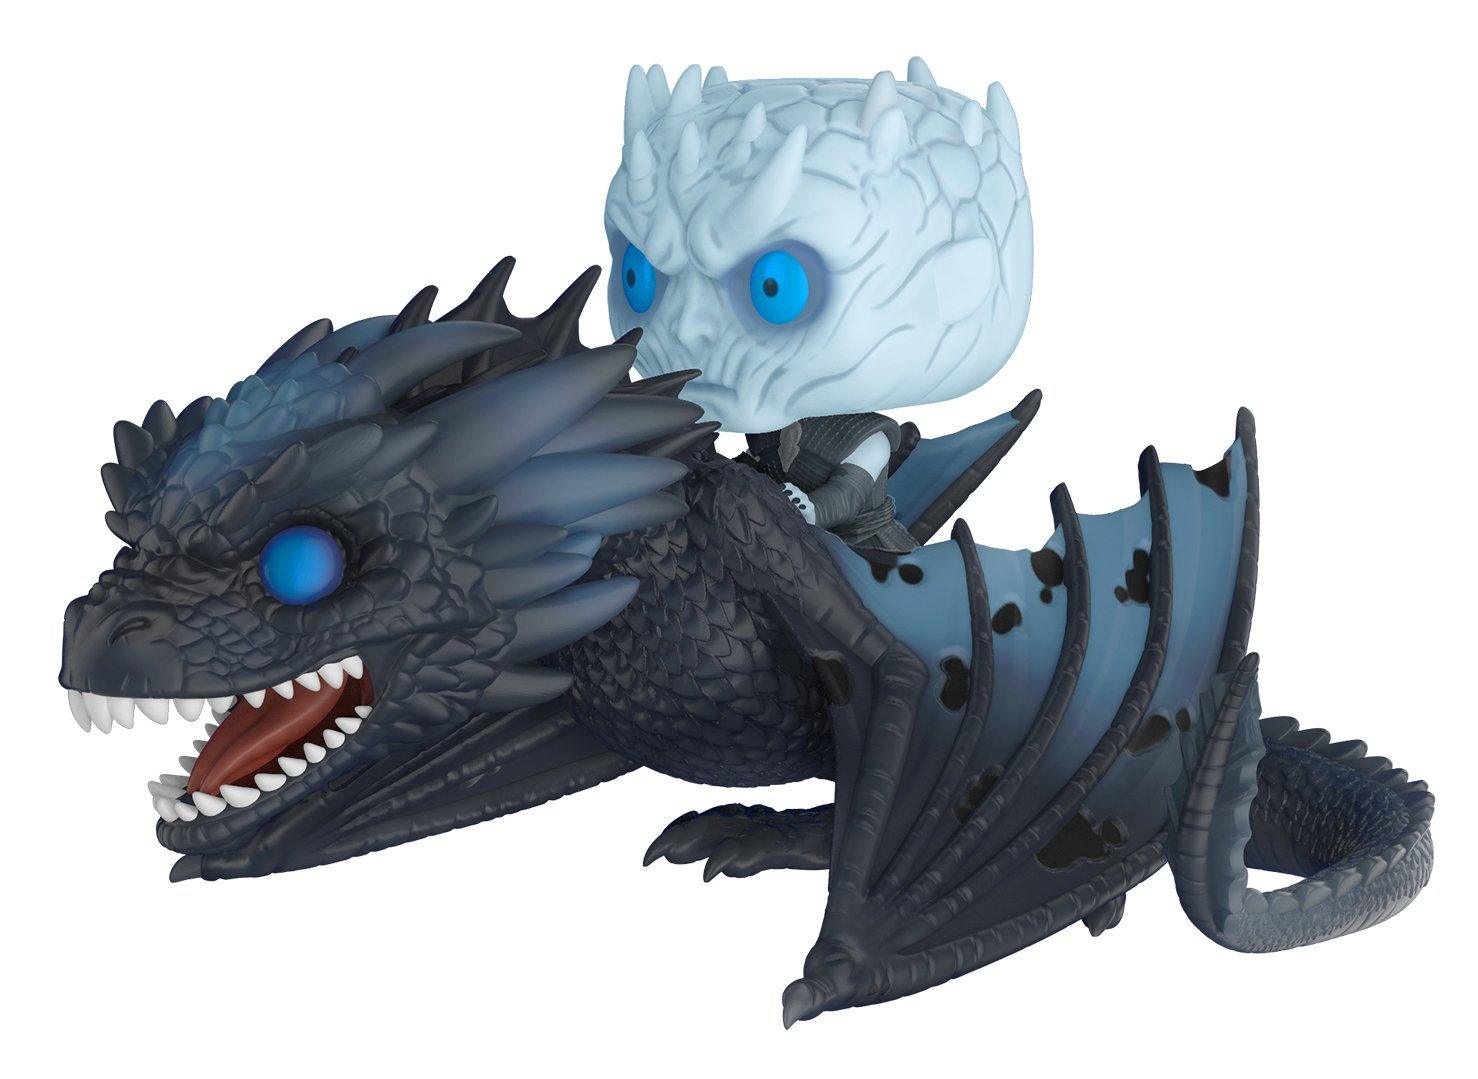 Game of Thrones: Funko Pop! Rides - Night King & Icy Viserion #58 Glow in the Dark - Magic Dreams Store